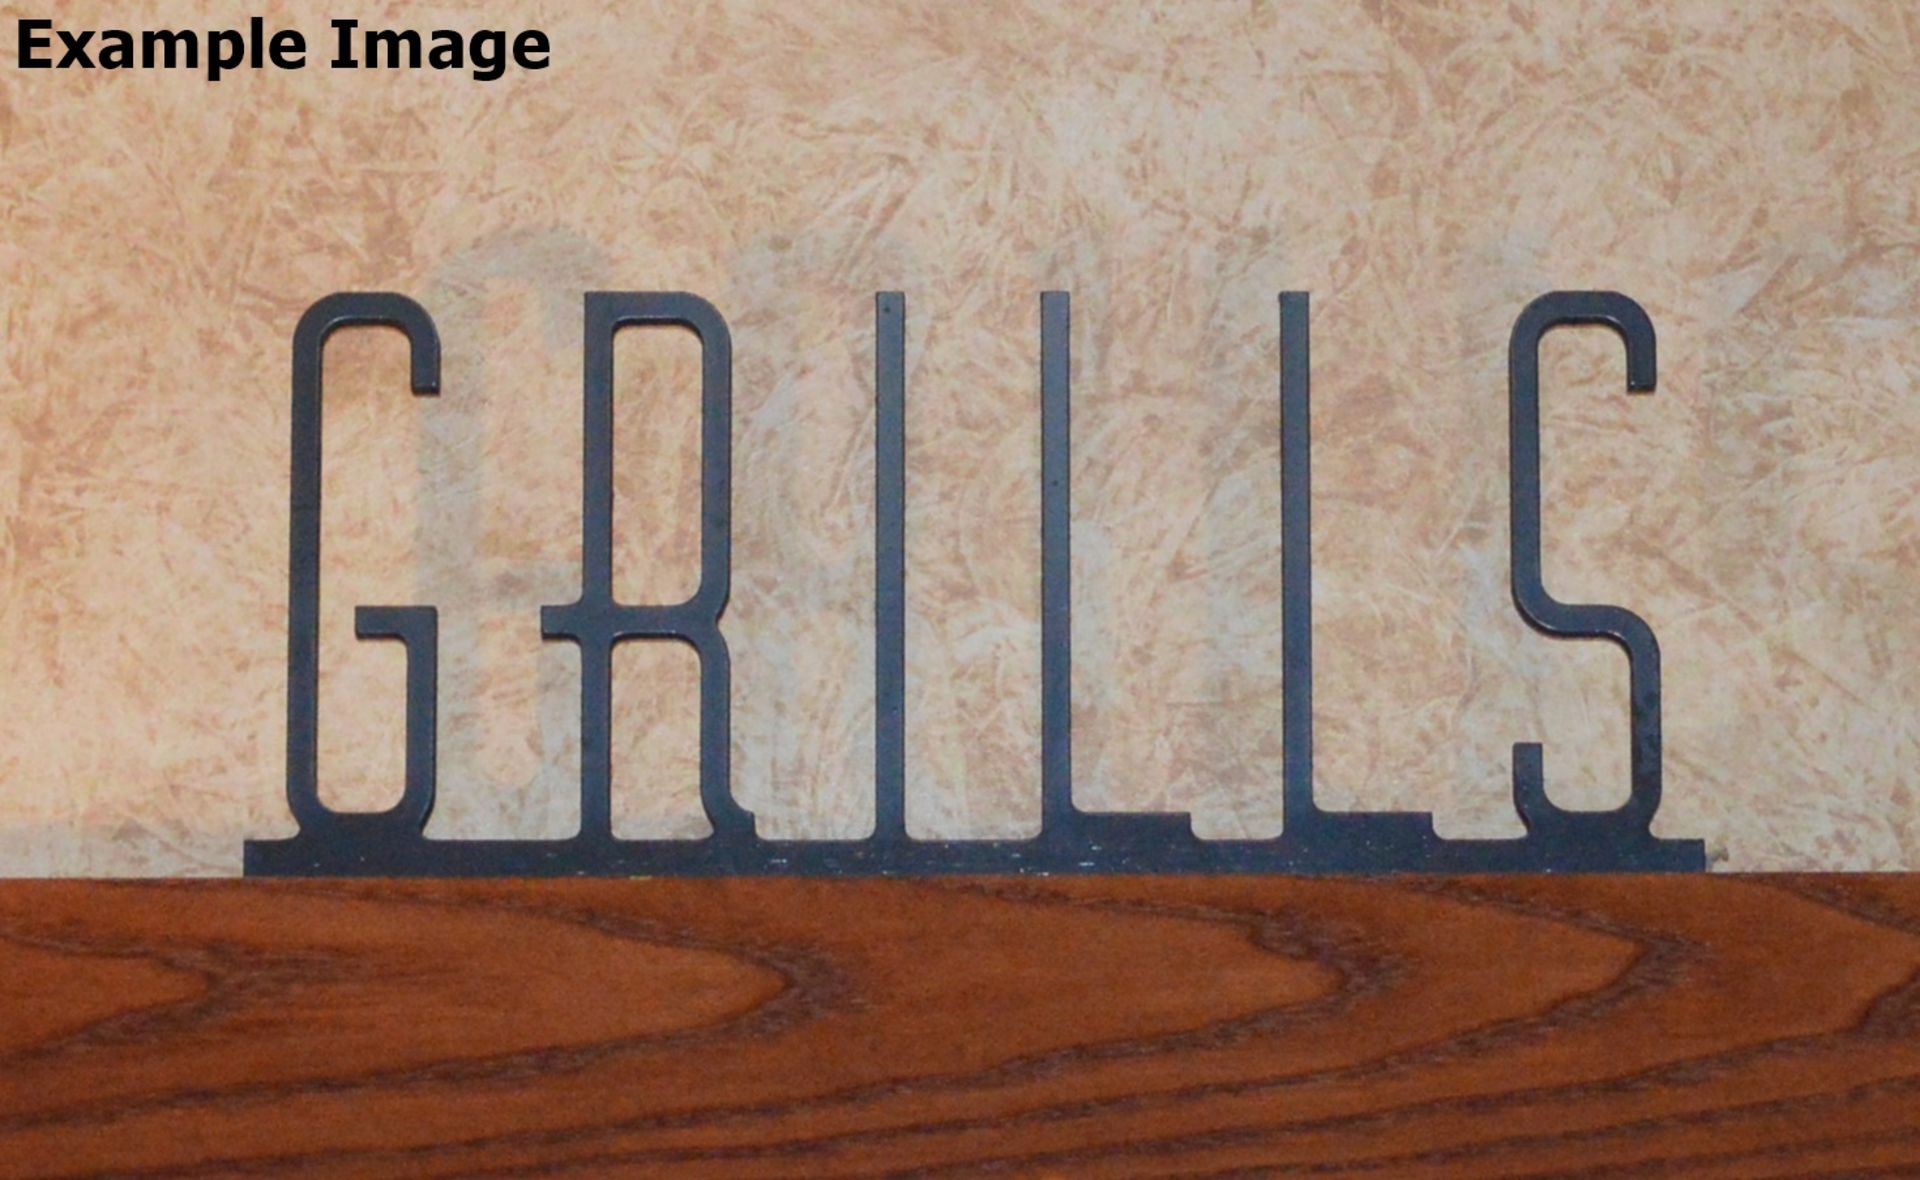 40 x Wooden Signs Suitable For Restaurants, Cafes, Bistros etc - Includes Grills, Amaretto, Penne, - Image 23 of 31